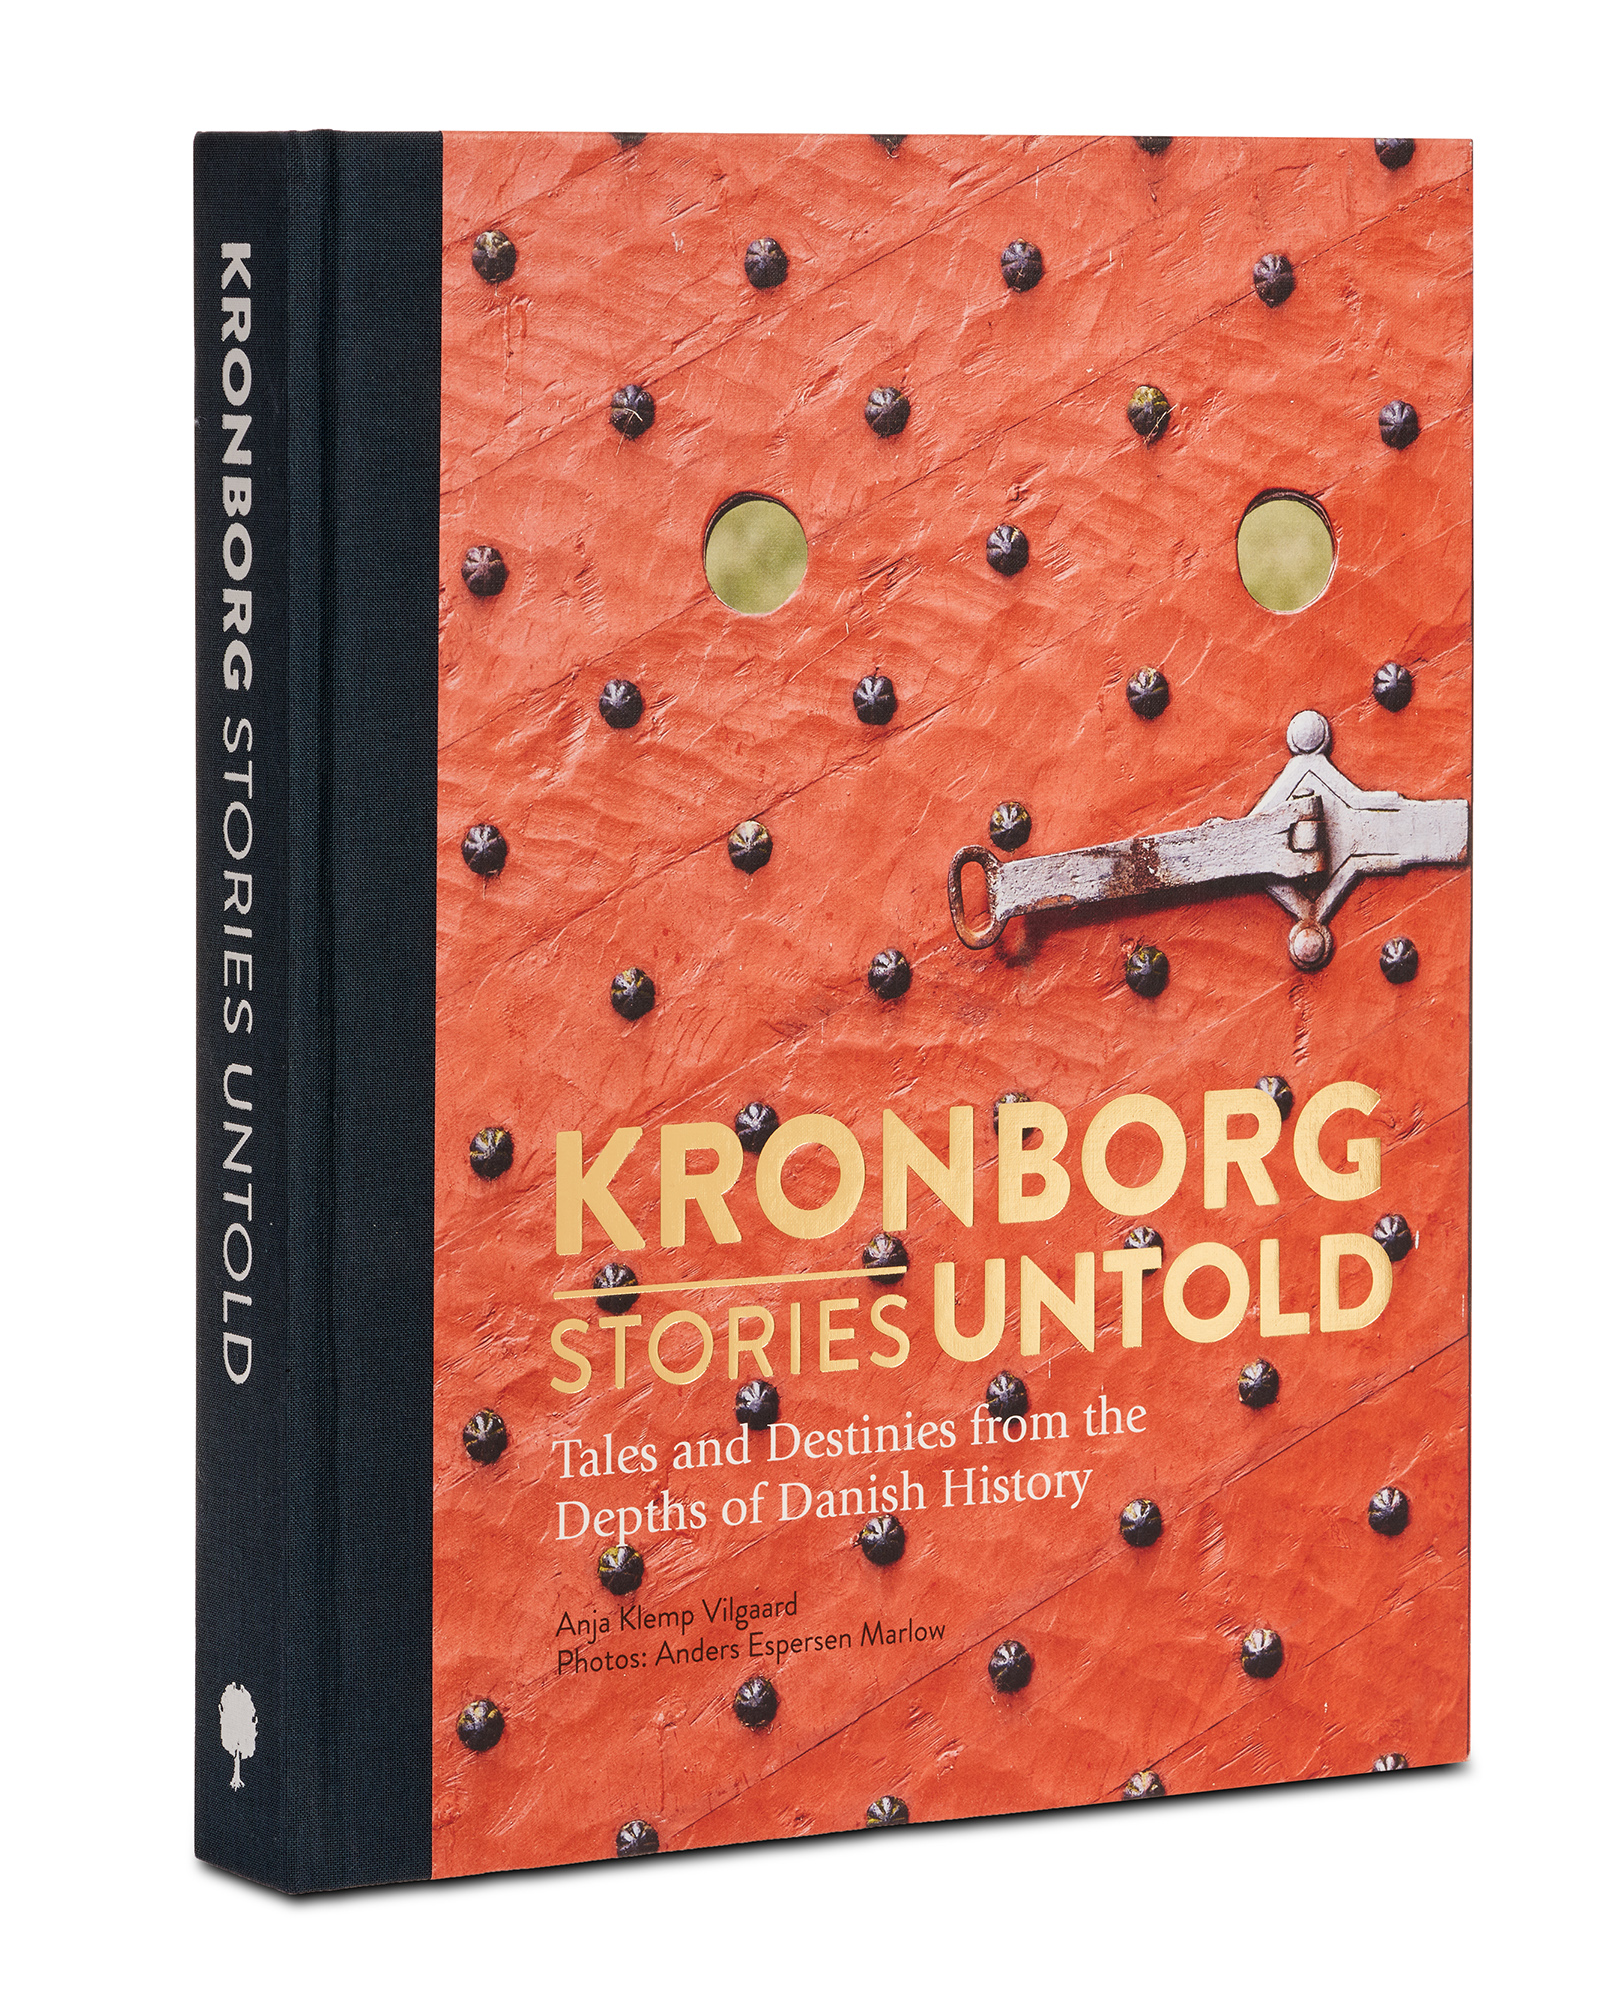 Kronborg Stories Untold. A book about the Danish castle - and world heritage site - Kronborg Slot. The home of Shakespeares Mad prince hamlet.